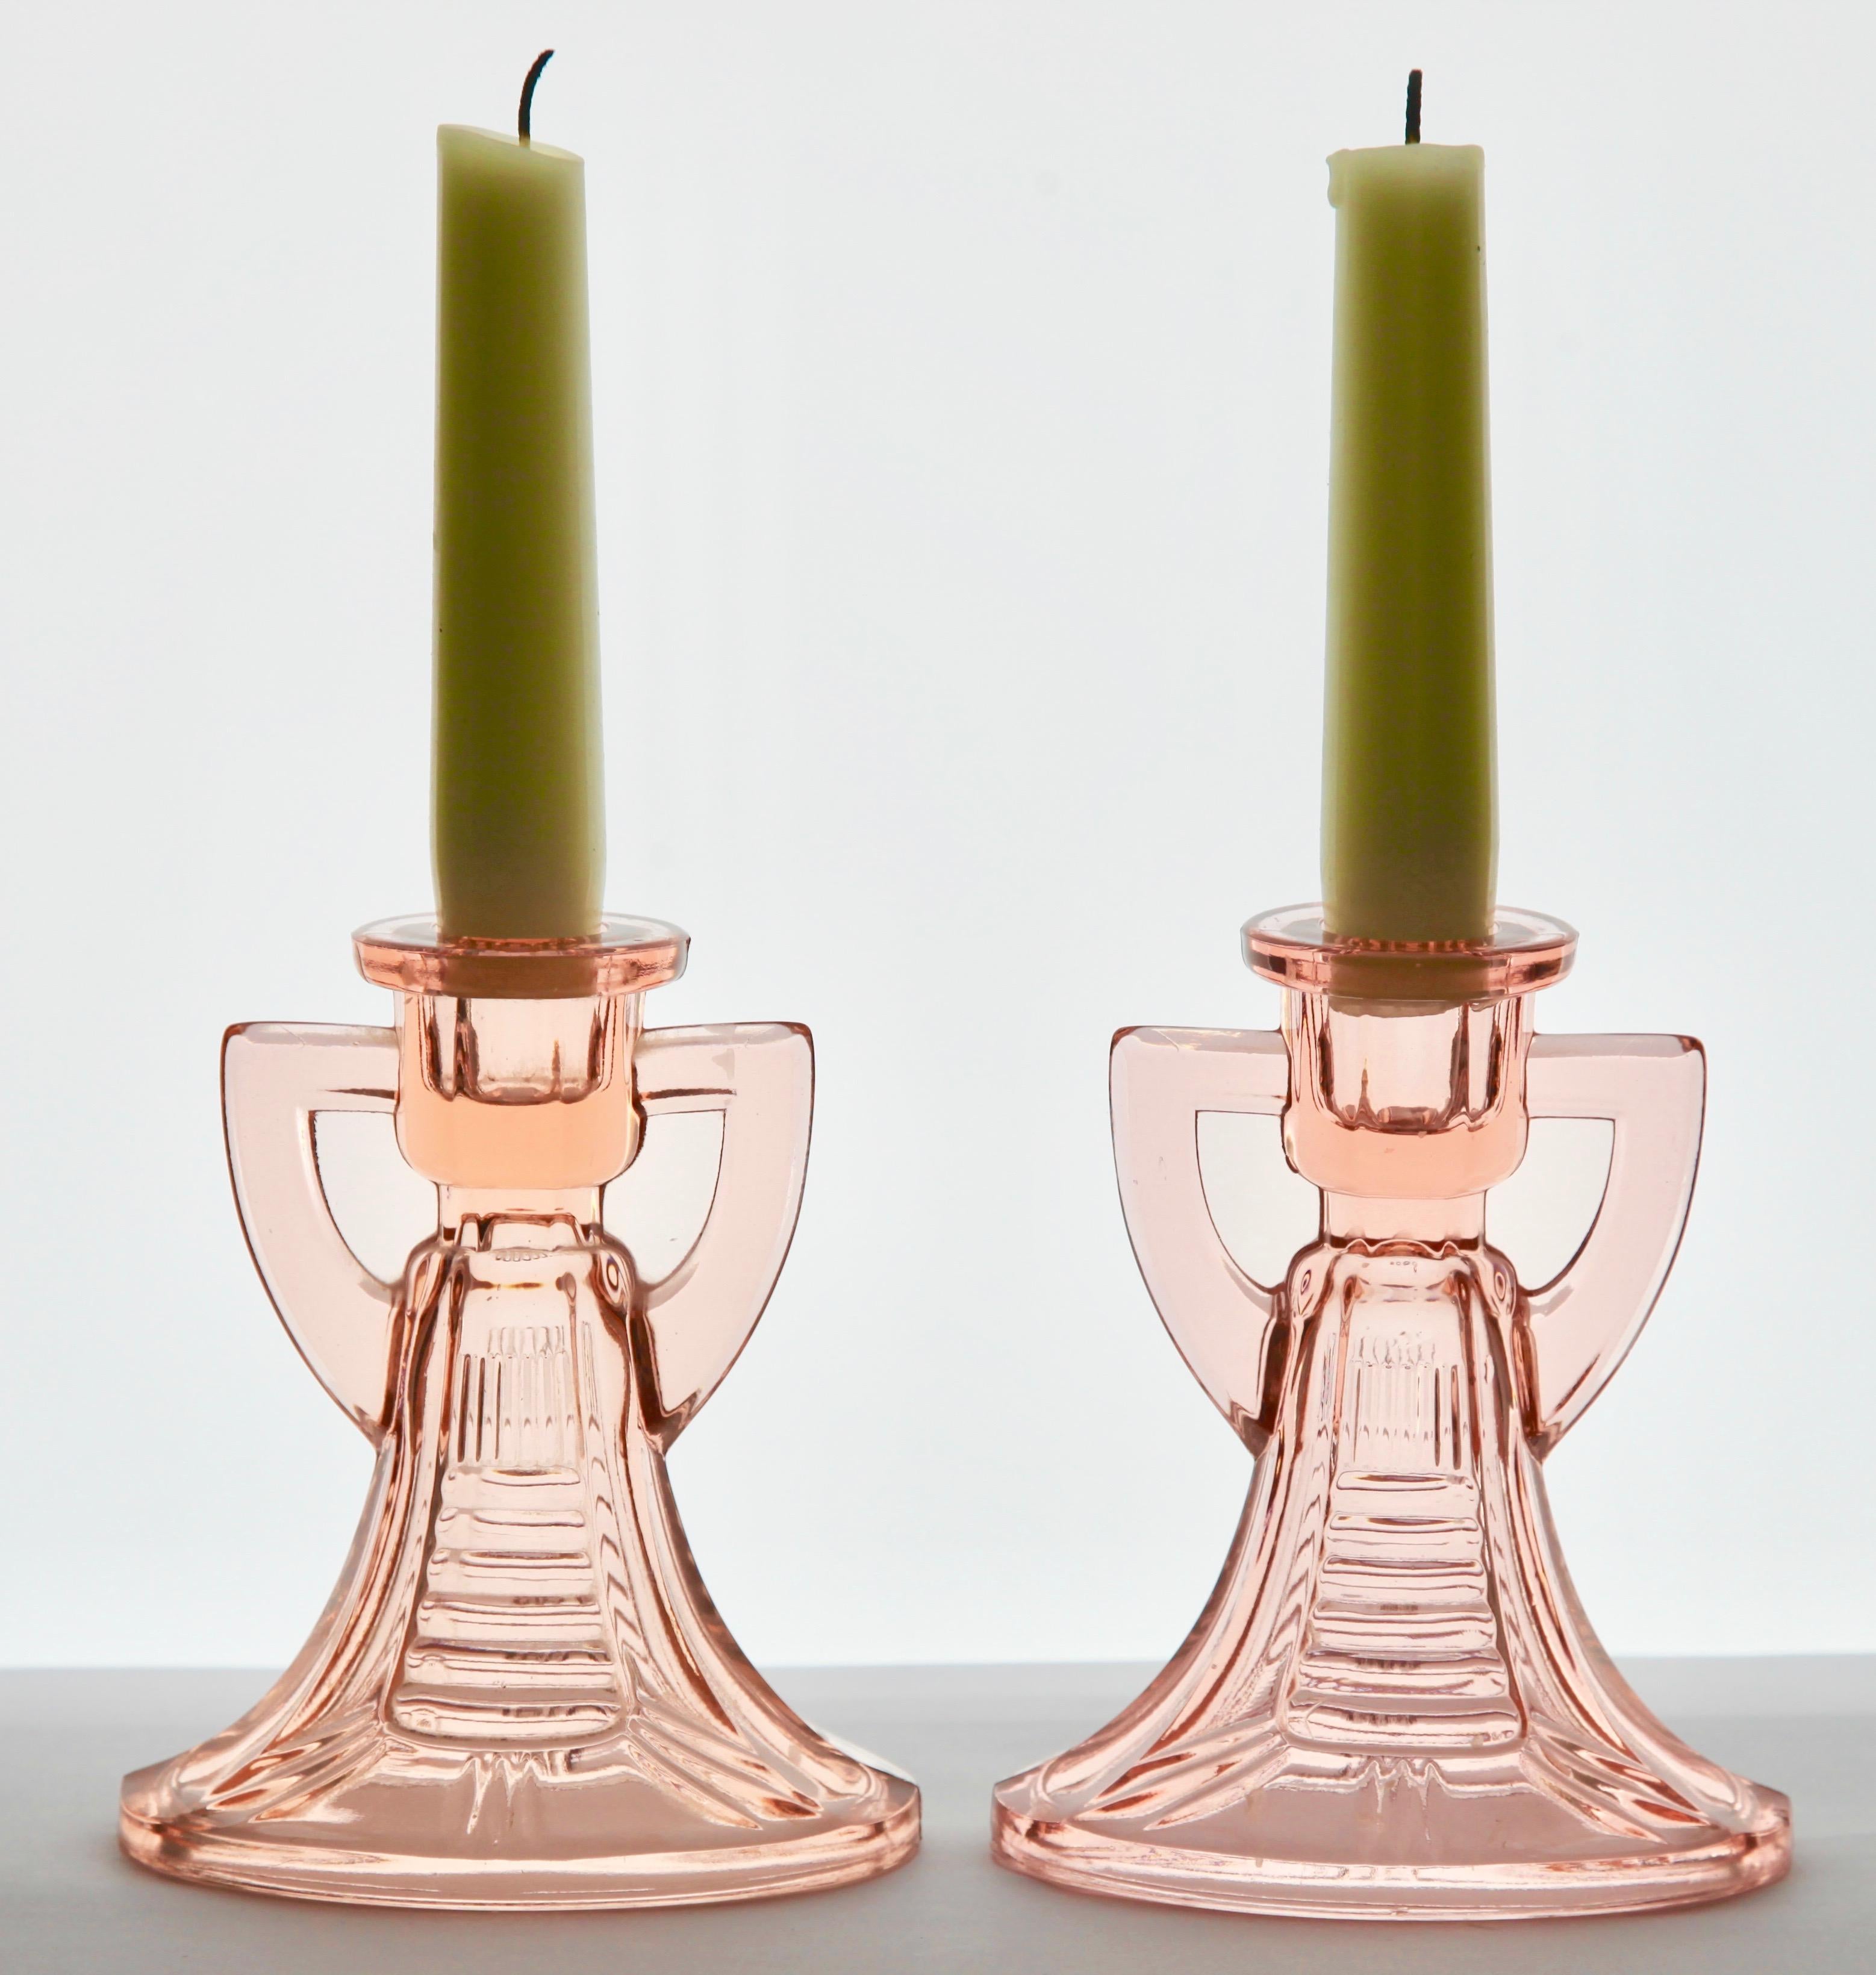 Victoria pattern, 1935, Belgium
Pair of very nice Rosaline Art Deco candlesticks made by Val Saint-Lambert. (More in stock).
From the Luxval range by Charles Graffart and René Delvenne.
Named after European monarchs, the Victoria pattern is